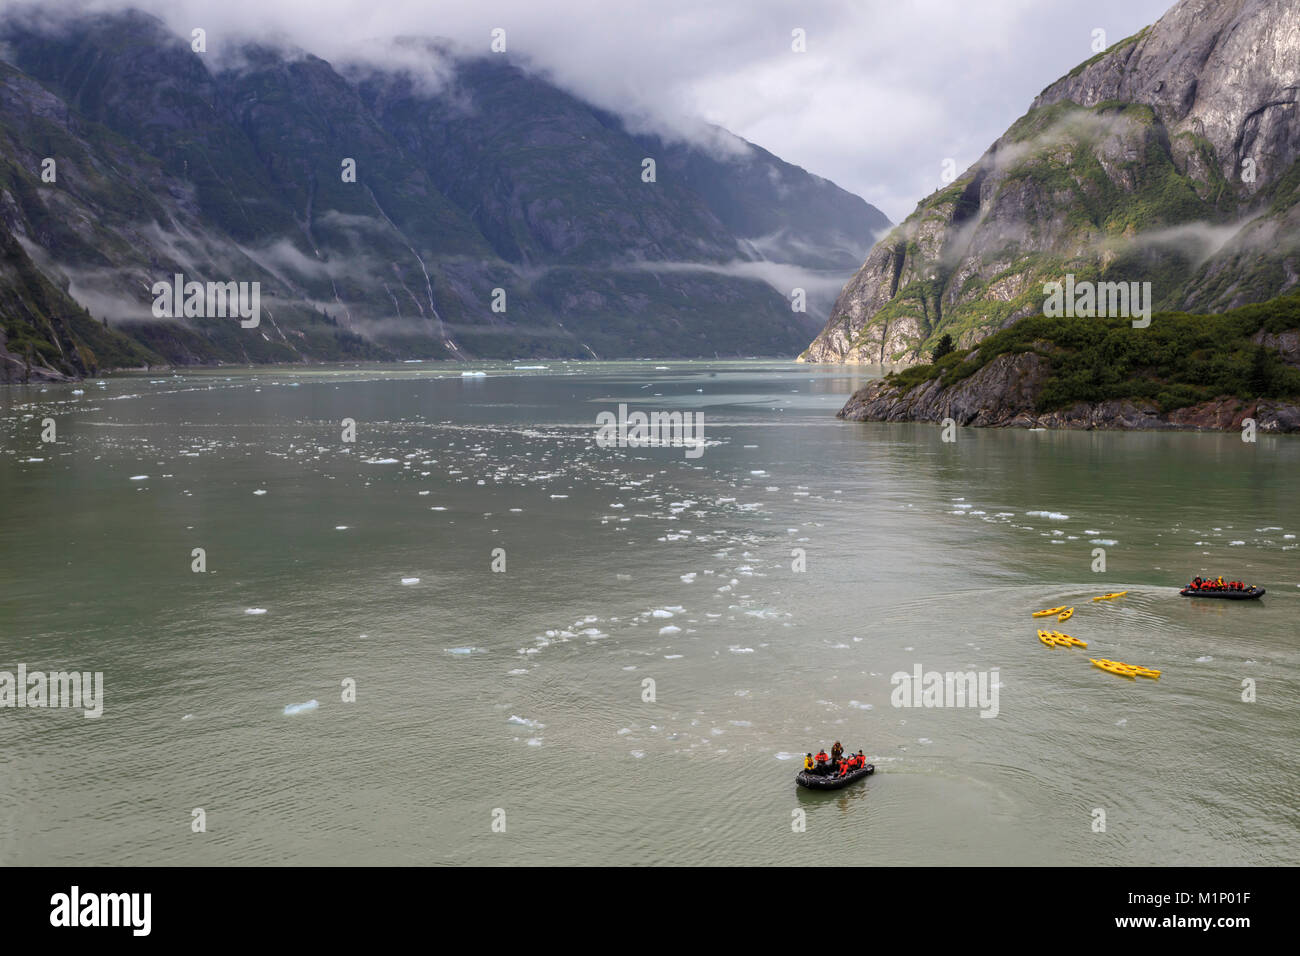 Kayak expedition preparations, Tracy Arm Fjord, clearing mist, icebergs and cascades, near South Sawyer Glacier, Alaska, USA, North America Stock Photo